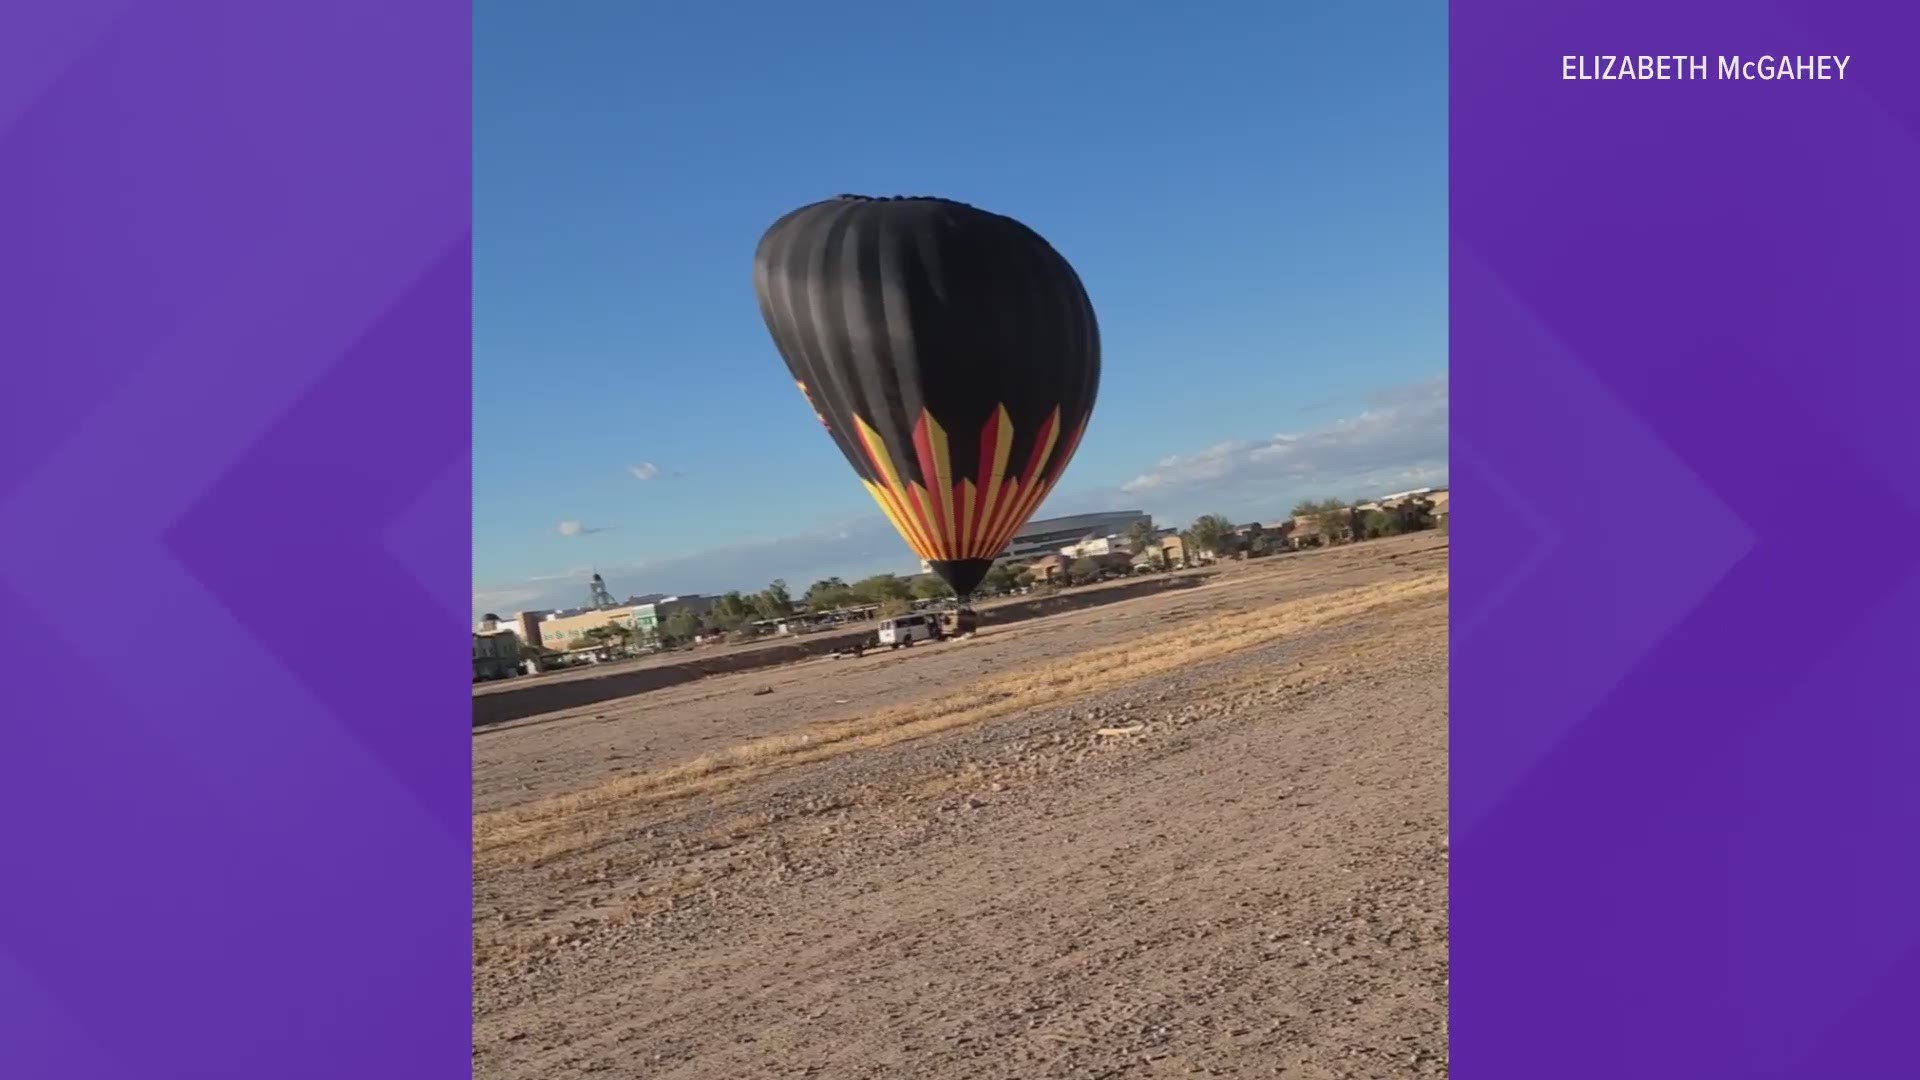 On Dec. 29, Elizabeth McGahey captured this hot air balloon crash in Gilbert. Officials said the 9 people on board the balloon did not have significant injuries.